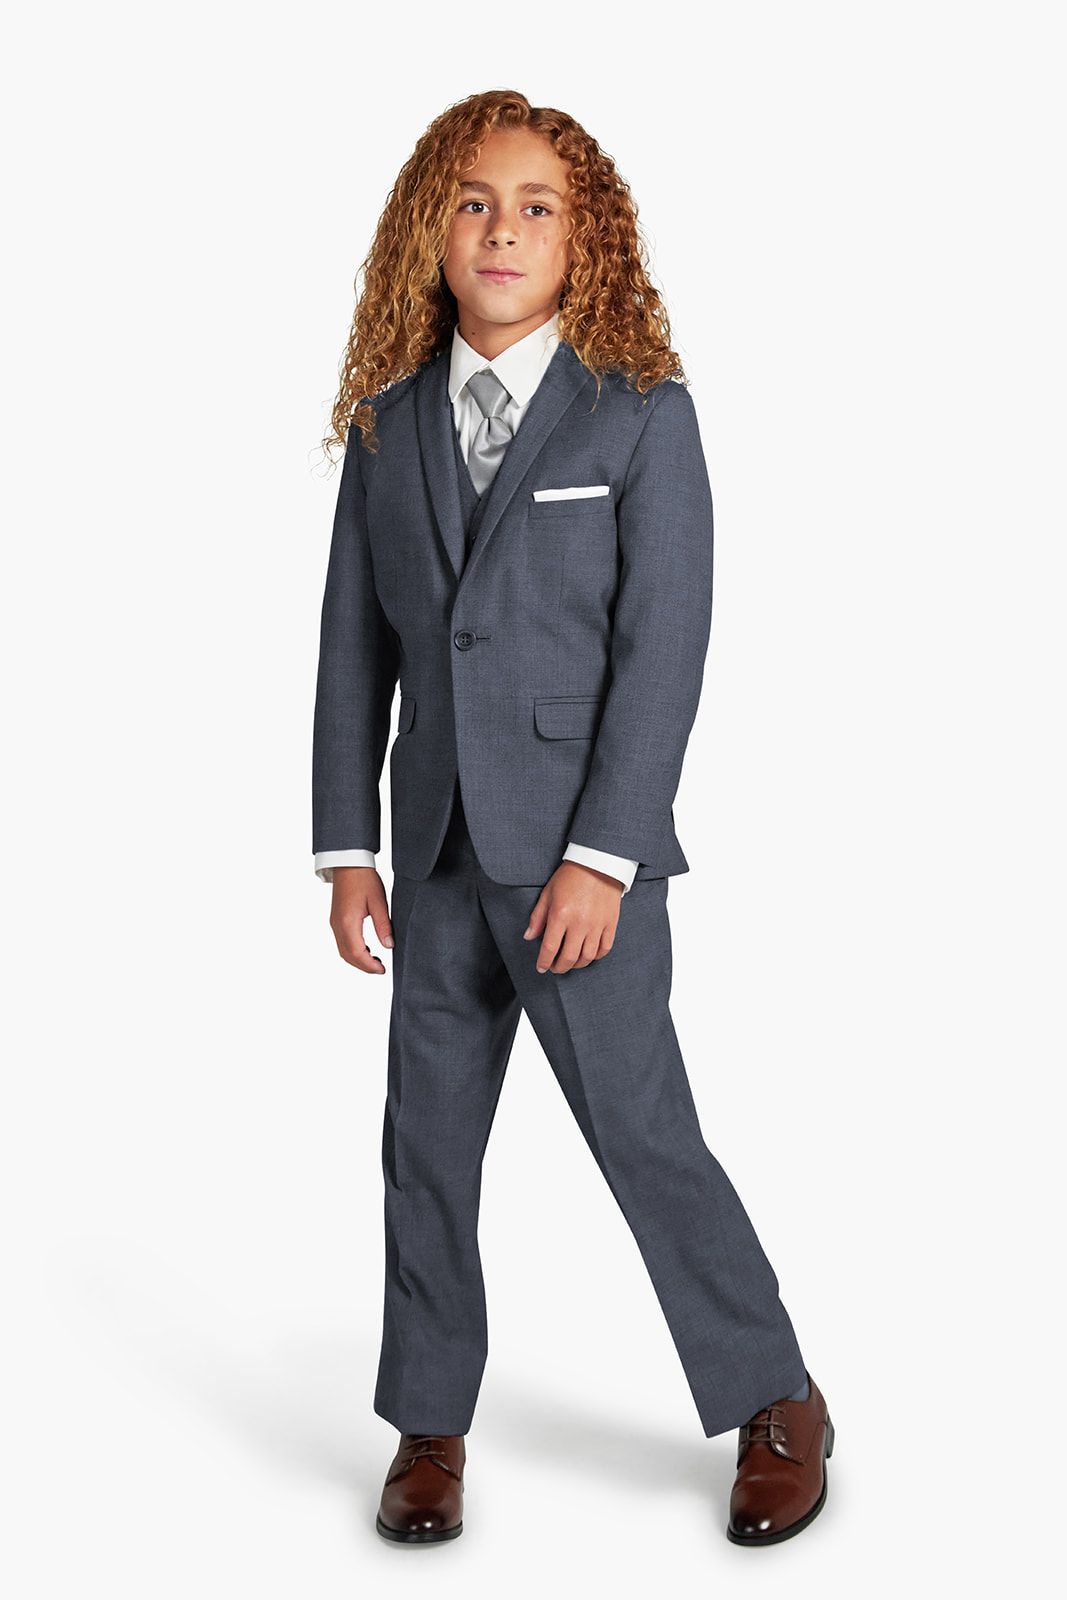 Iron Gray Suit for kids, boys, children, and teens